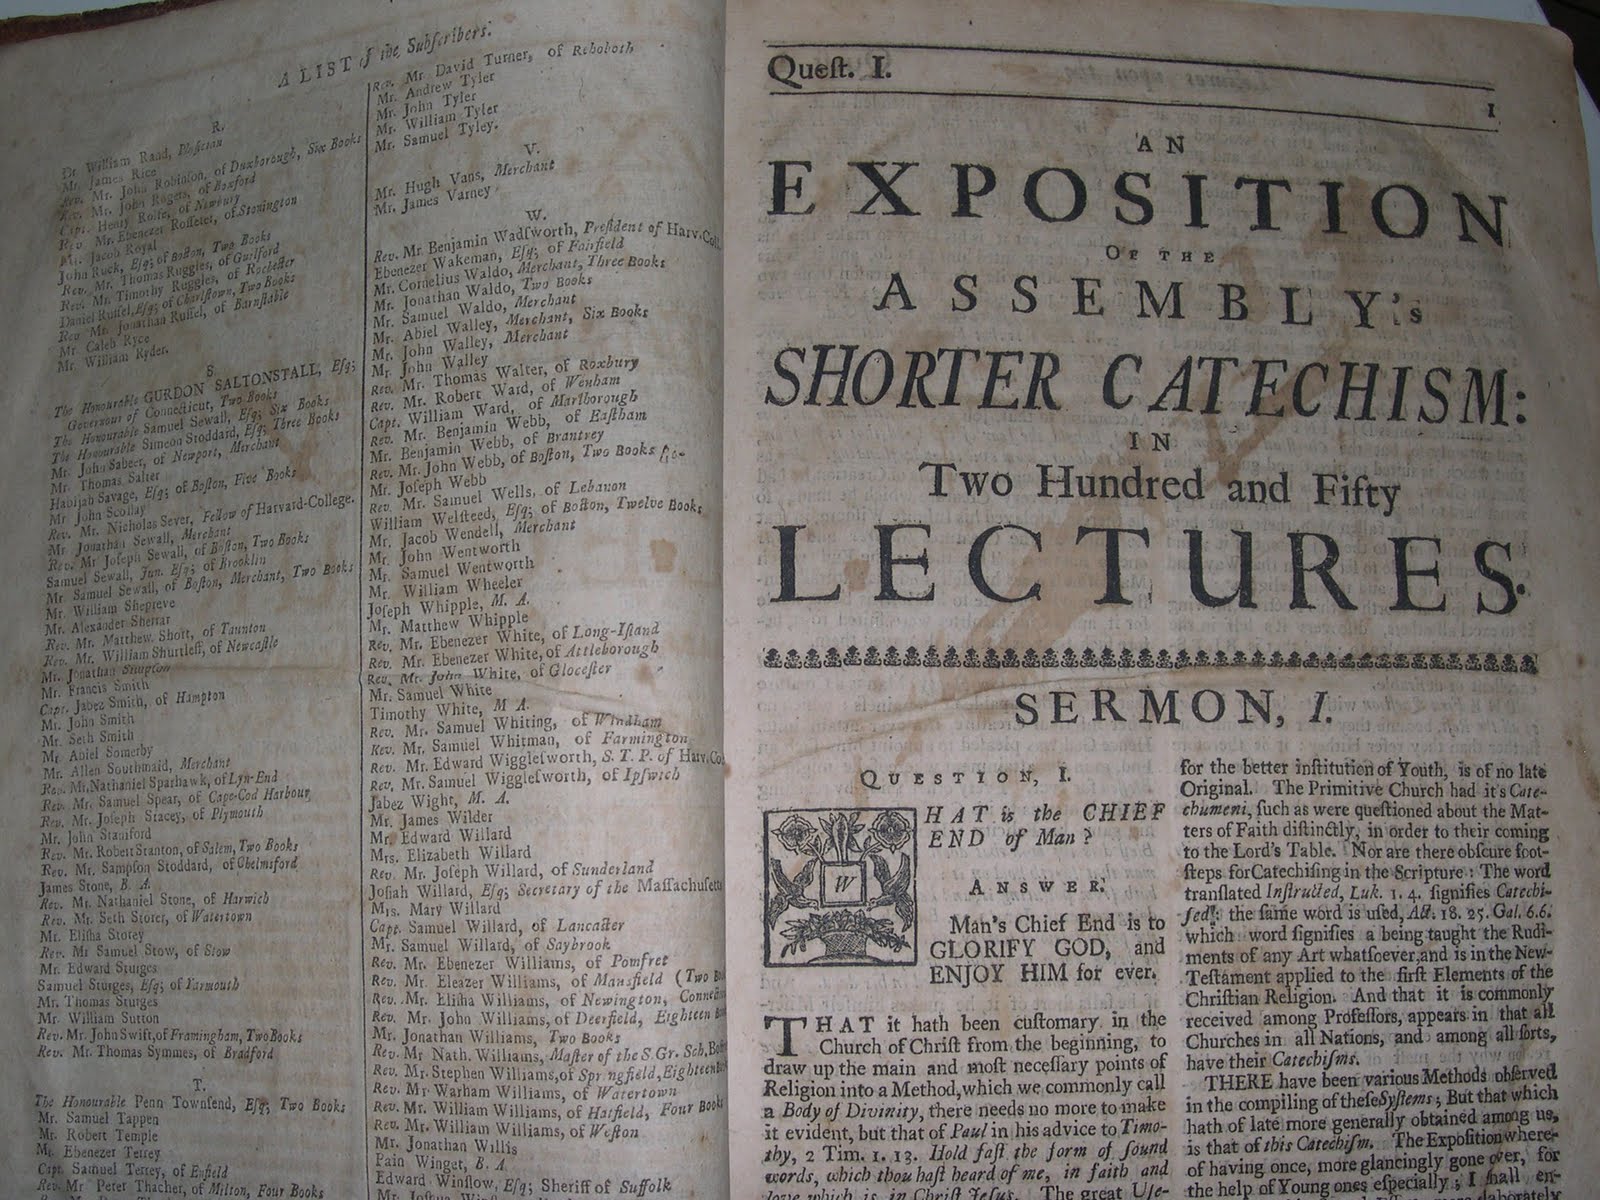 Title page of An Exposition of the Assembly's Shorter Catechism: in Two Hundred and Fifty lectures